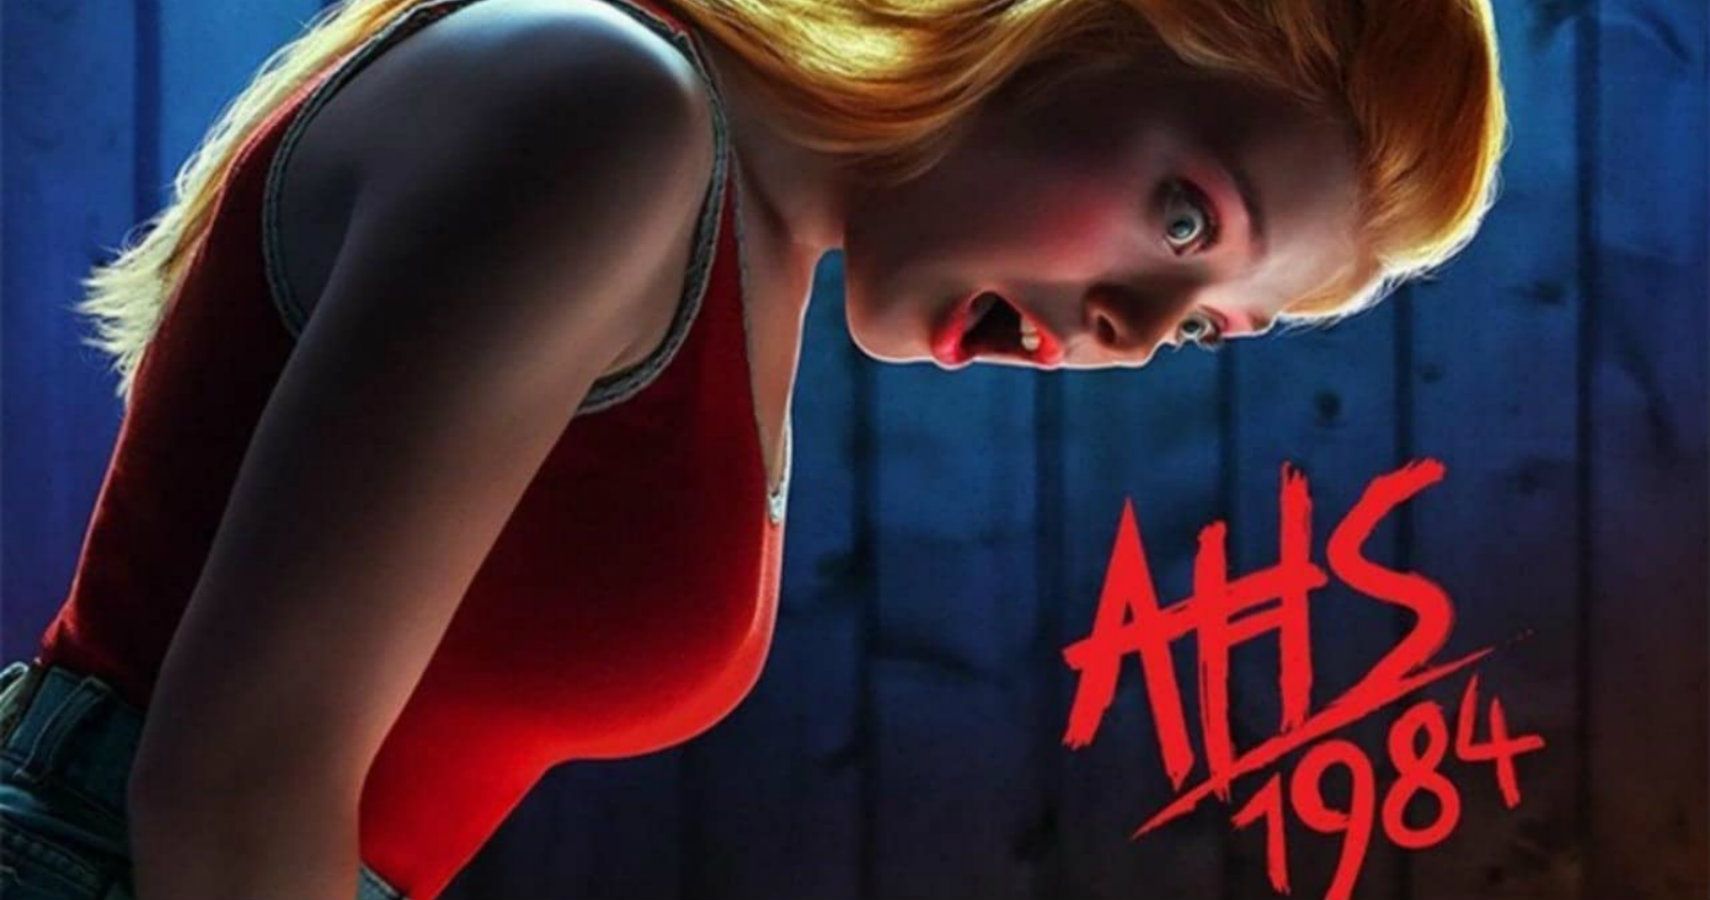 10 Shows To Watch If You Love American Horror Story